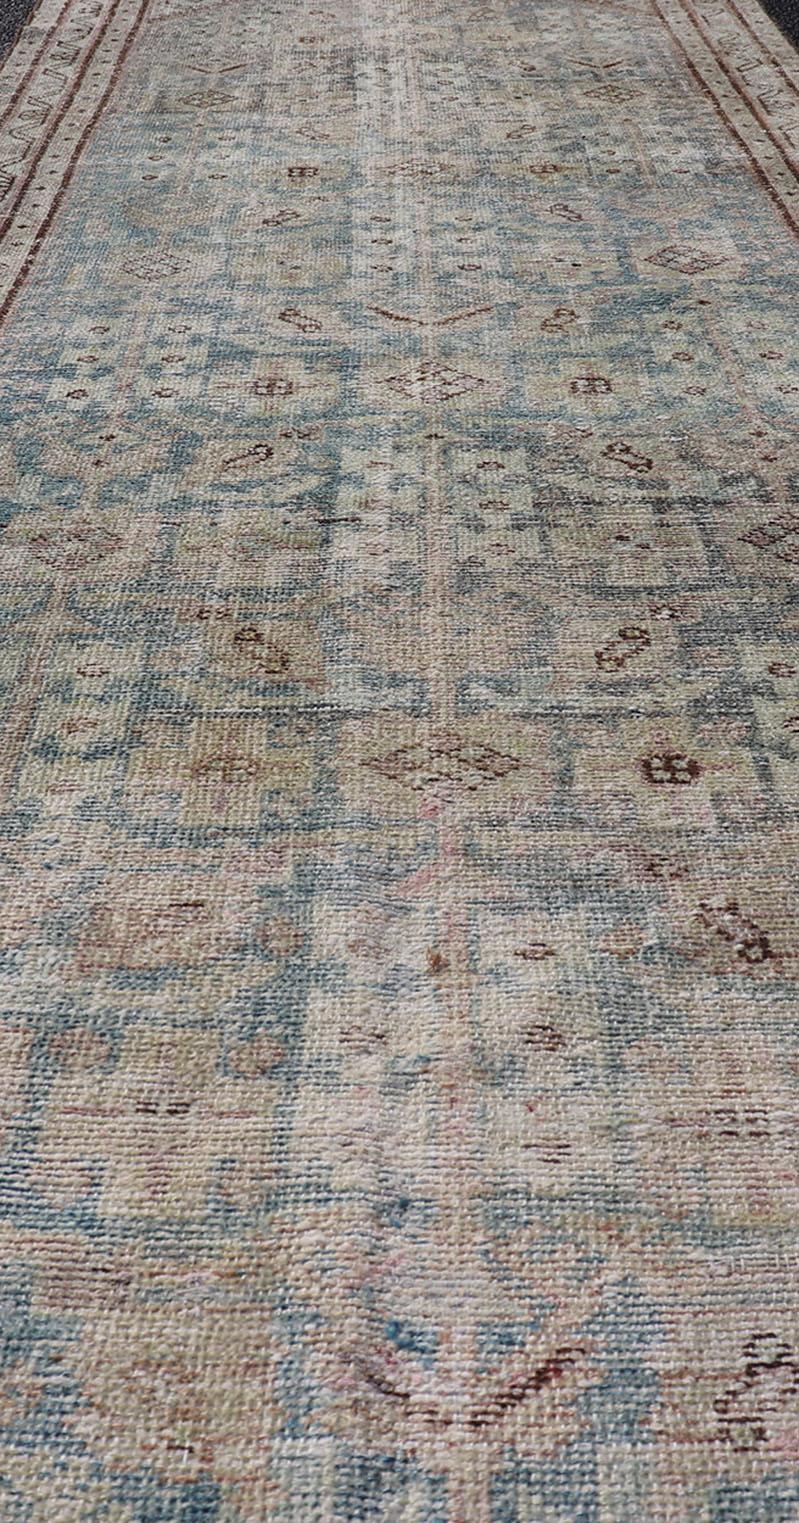 Malayer Antique Persian Hamedan Runner with Sub-Geometric Design in Blues and Neutrals  For Sale